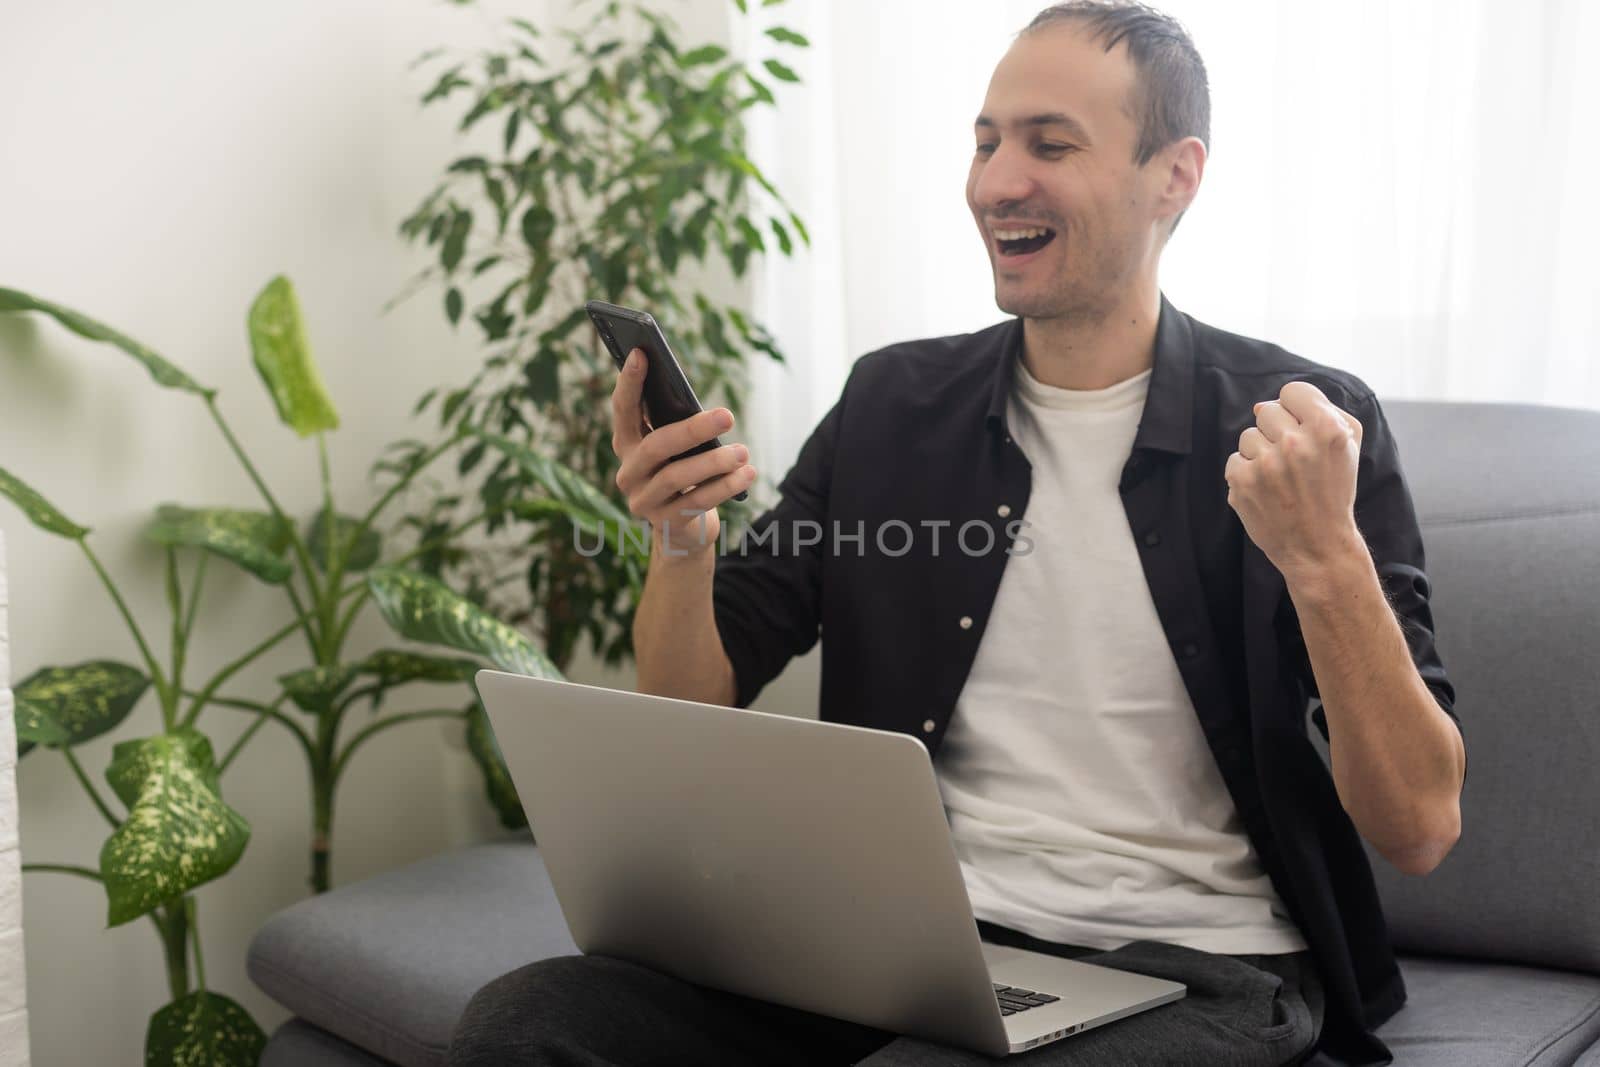 Smiling young man typing on mobile phone while sitting on a sofa at home with laptop computer.